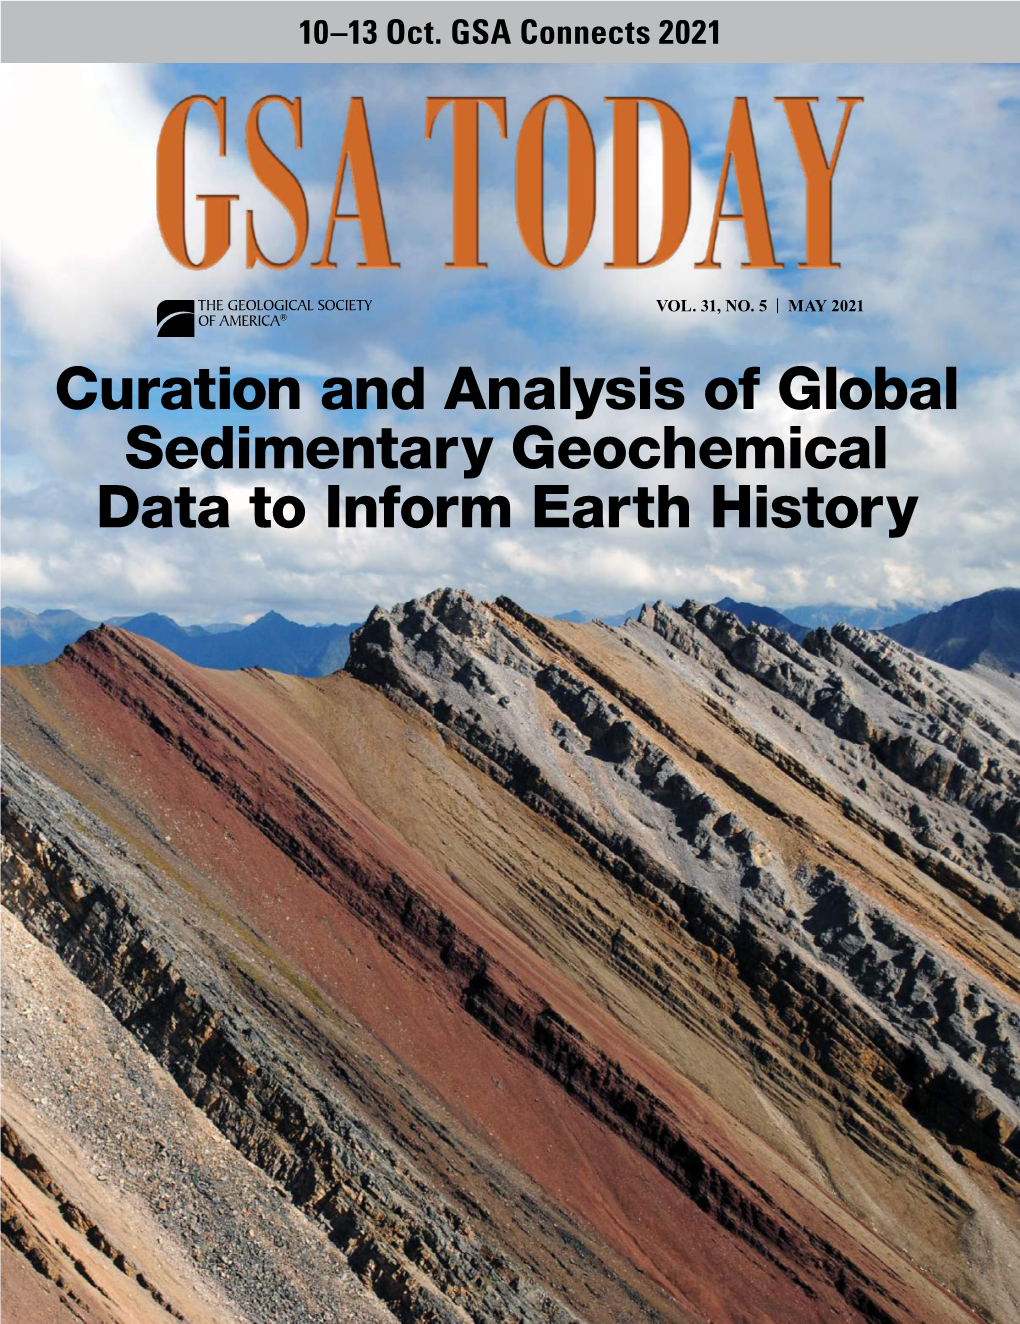 Curation and Analysis of Global Sedimentary Geochemical Data to Inform Earth History EXPAND YOUR LIBRARY with GSA E-Books